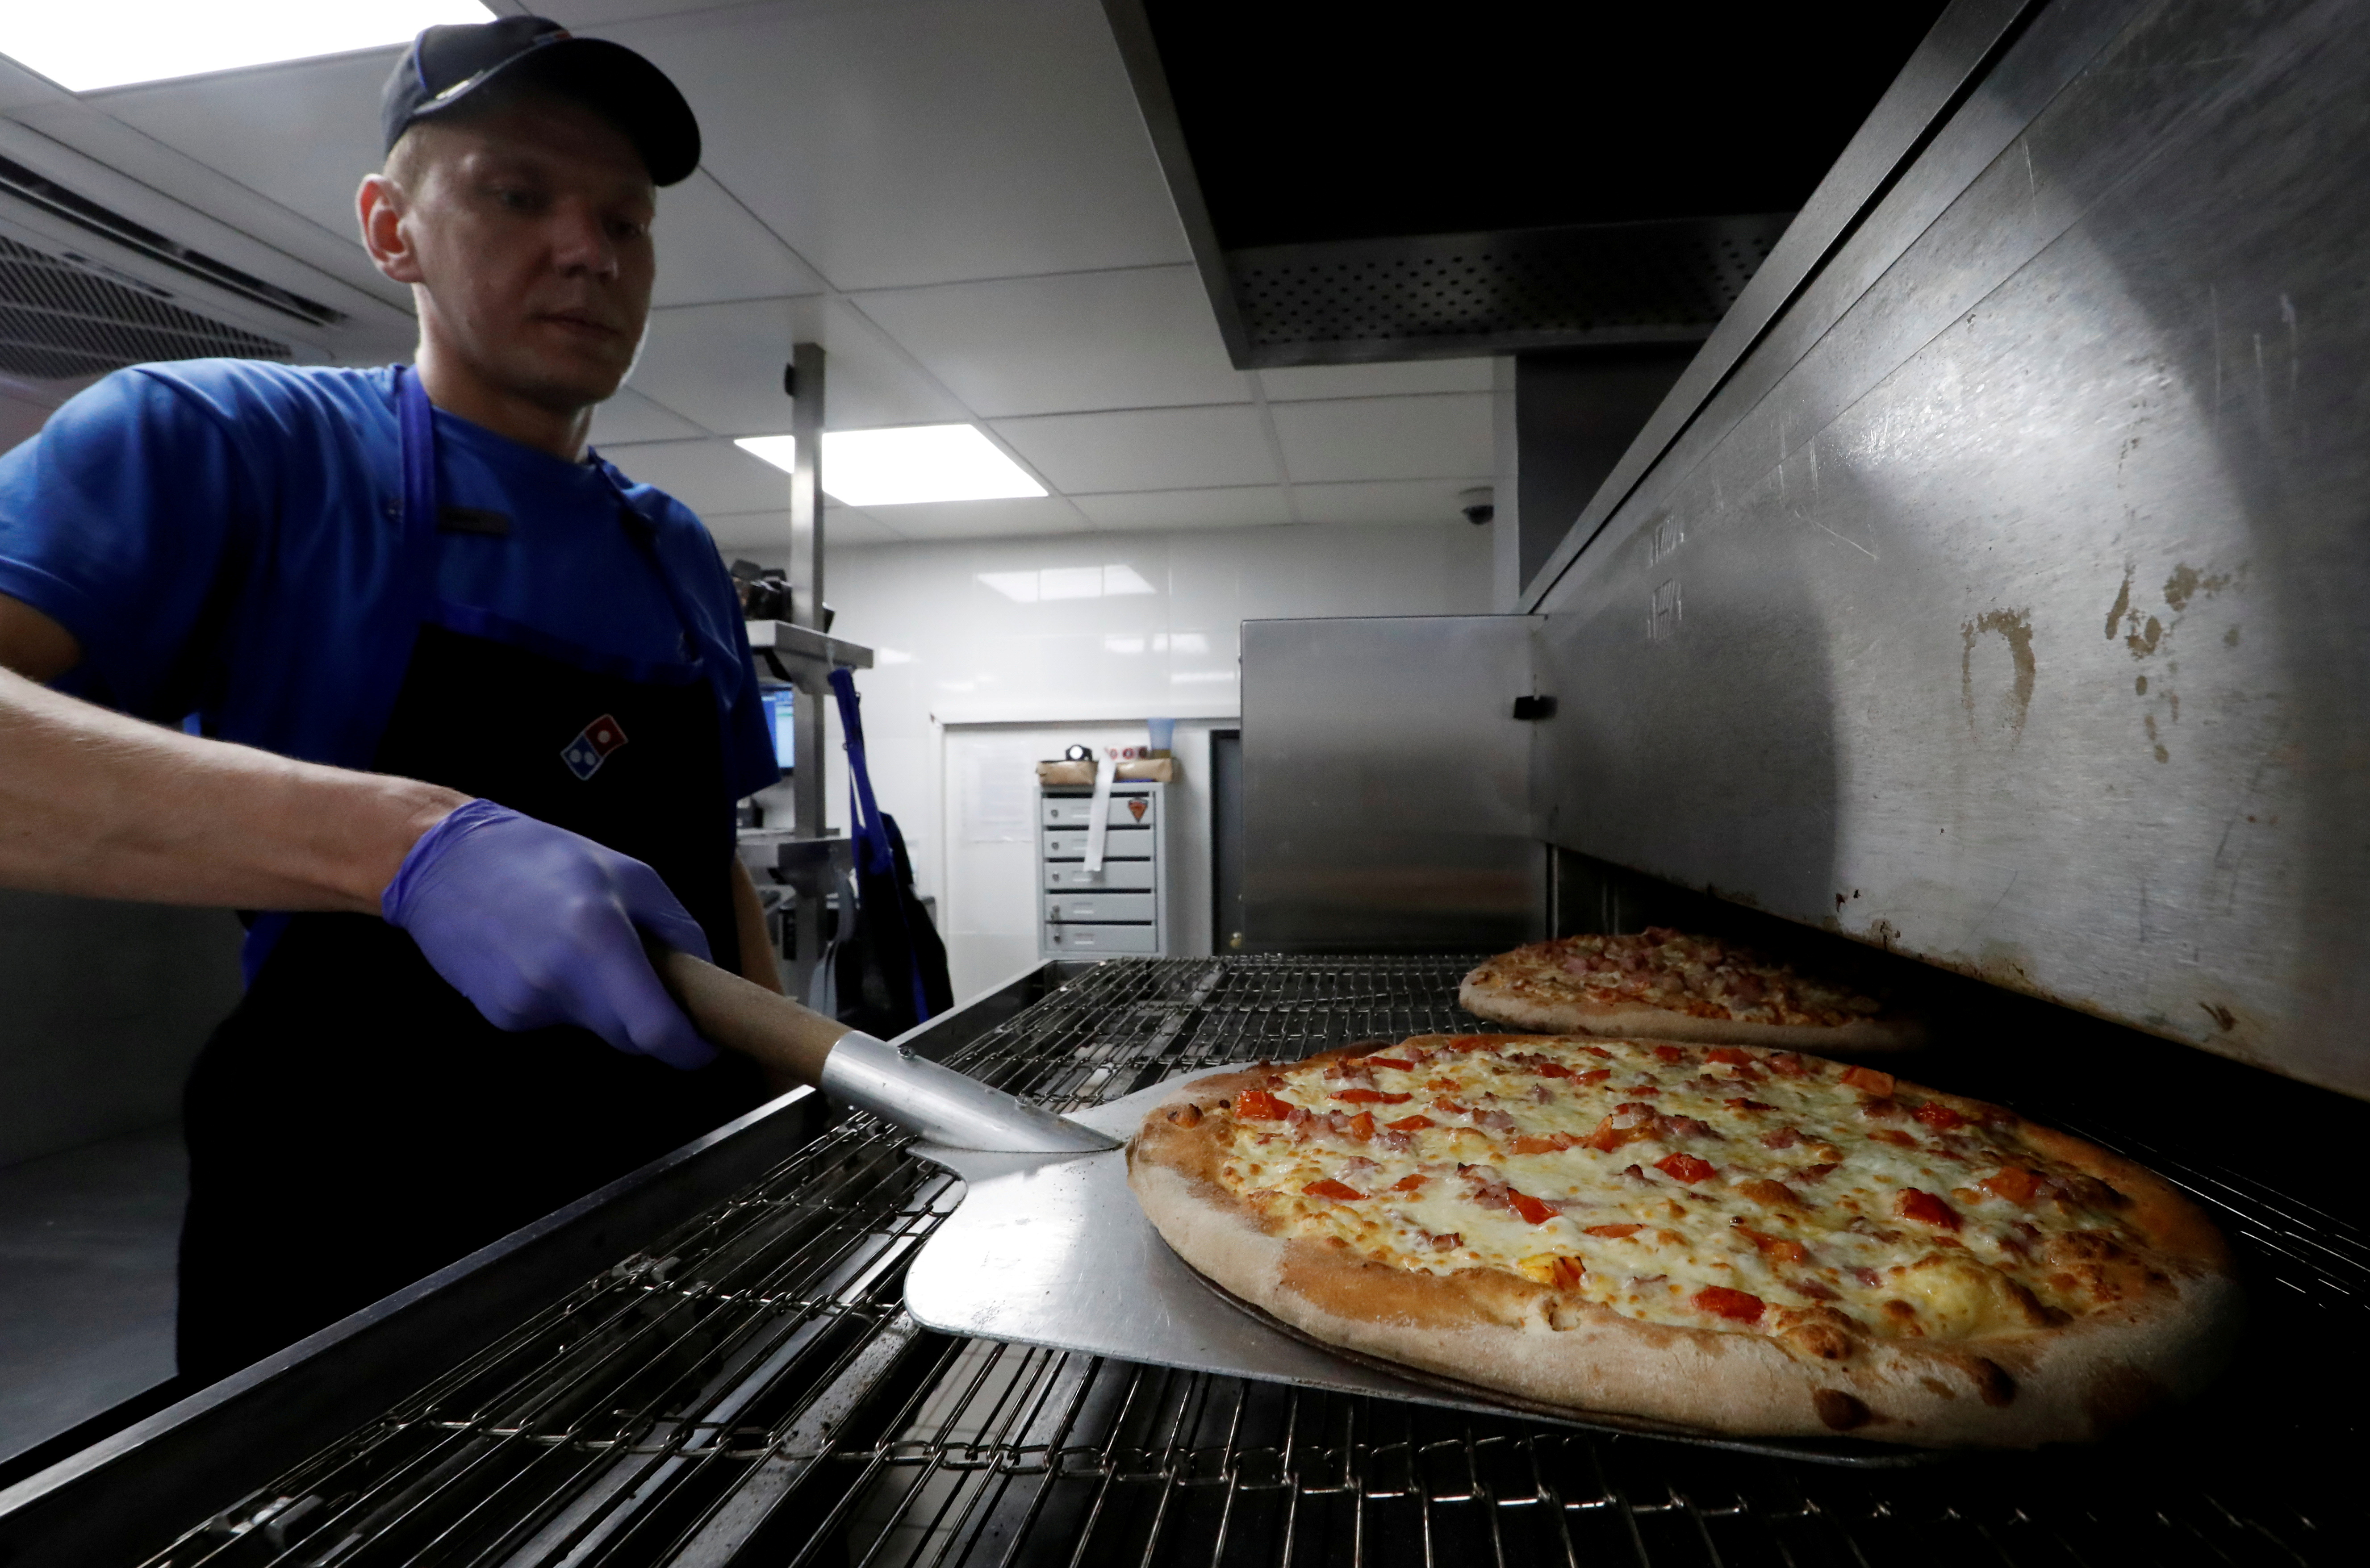 A staff member prepares pizzas at a Domino's Pizza restaurant in Moscow, Russia